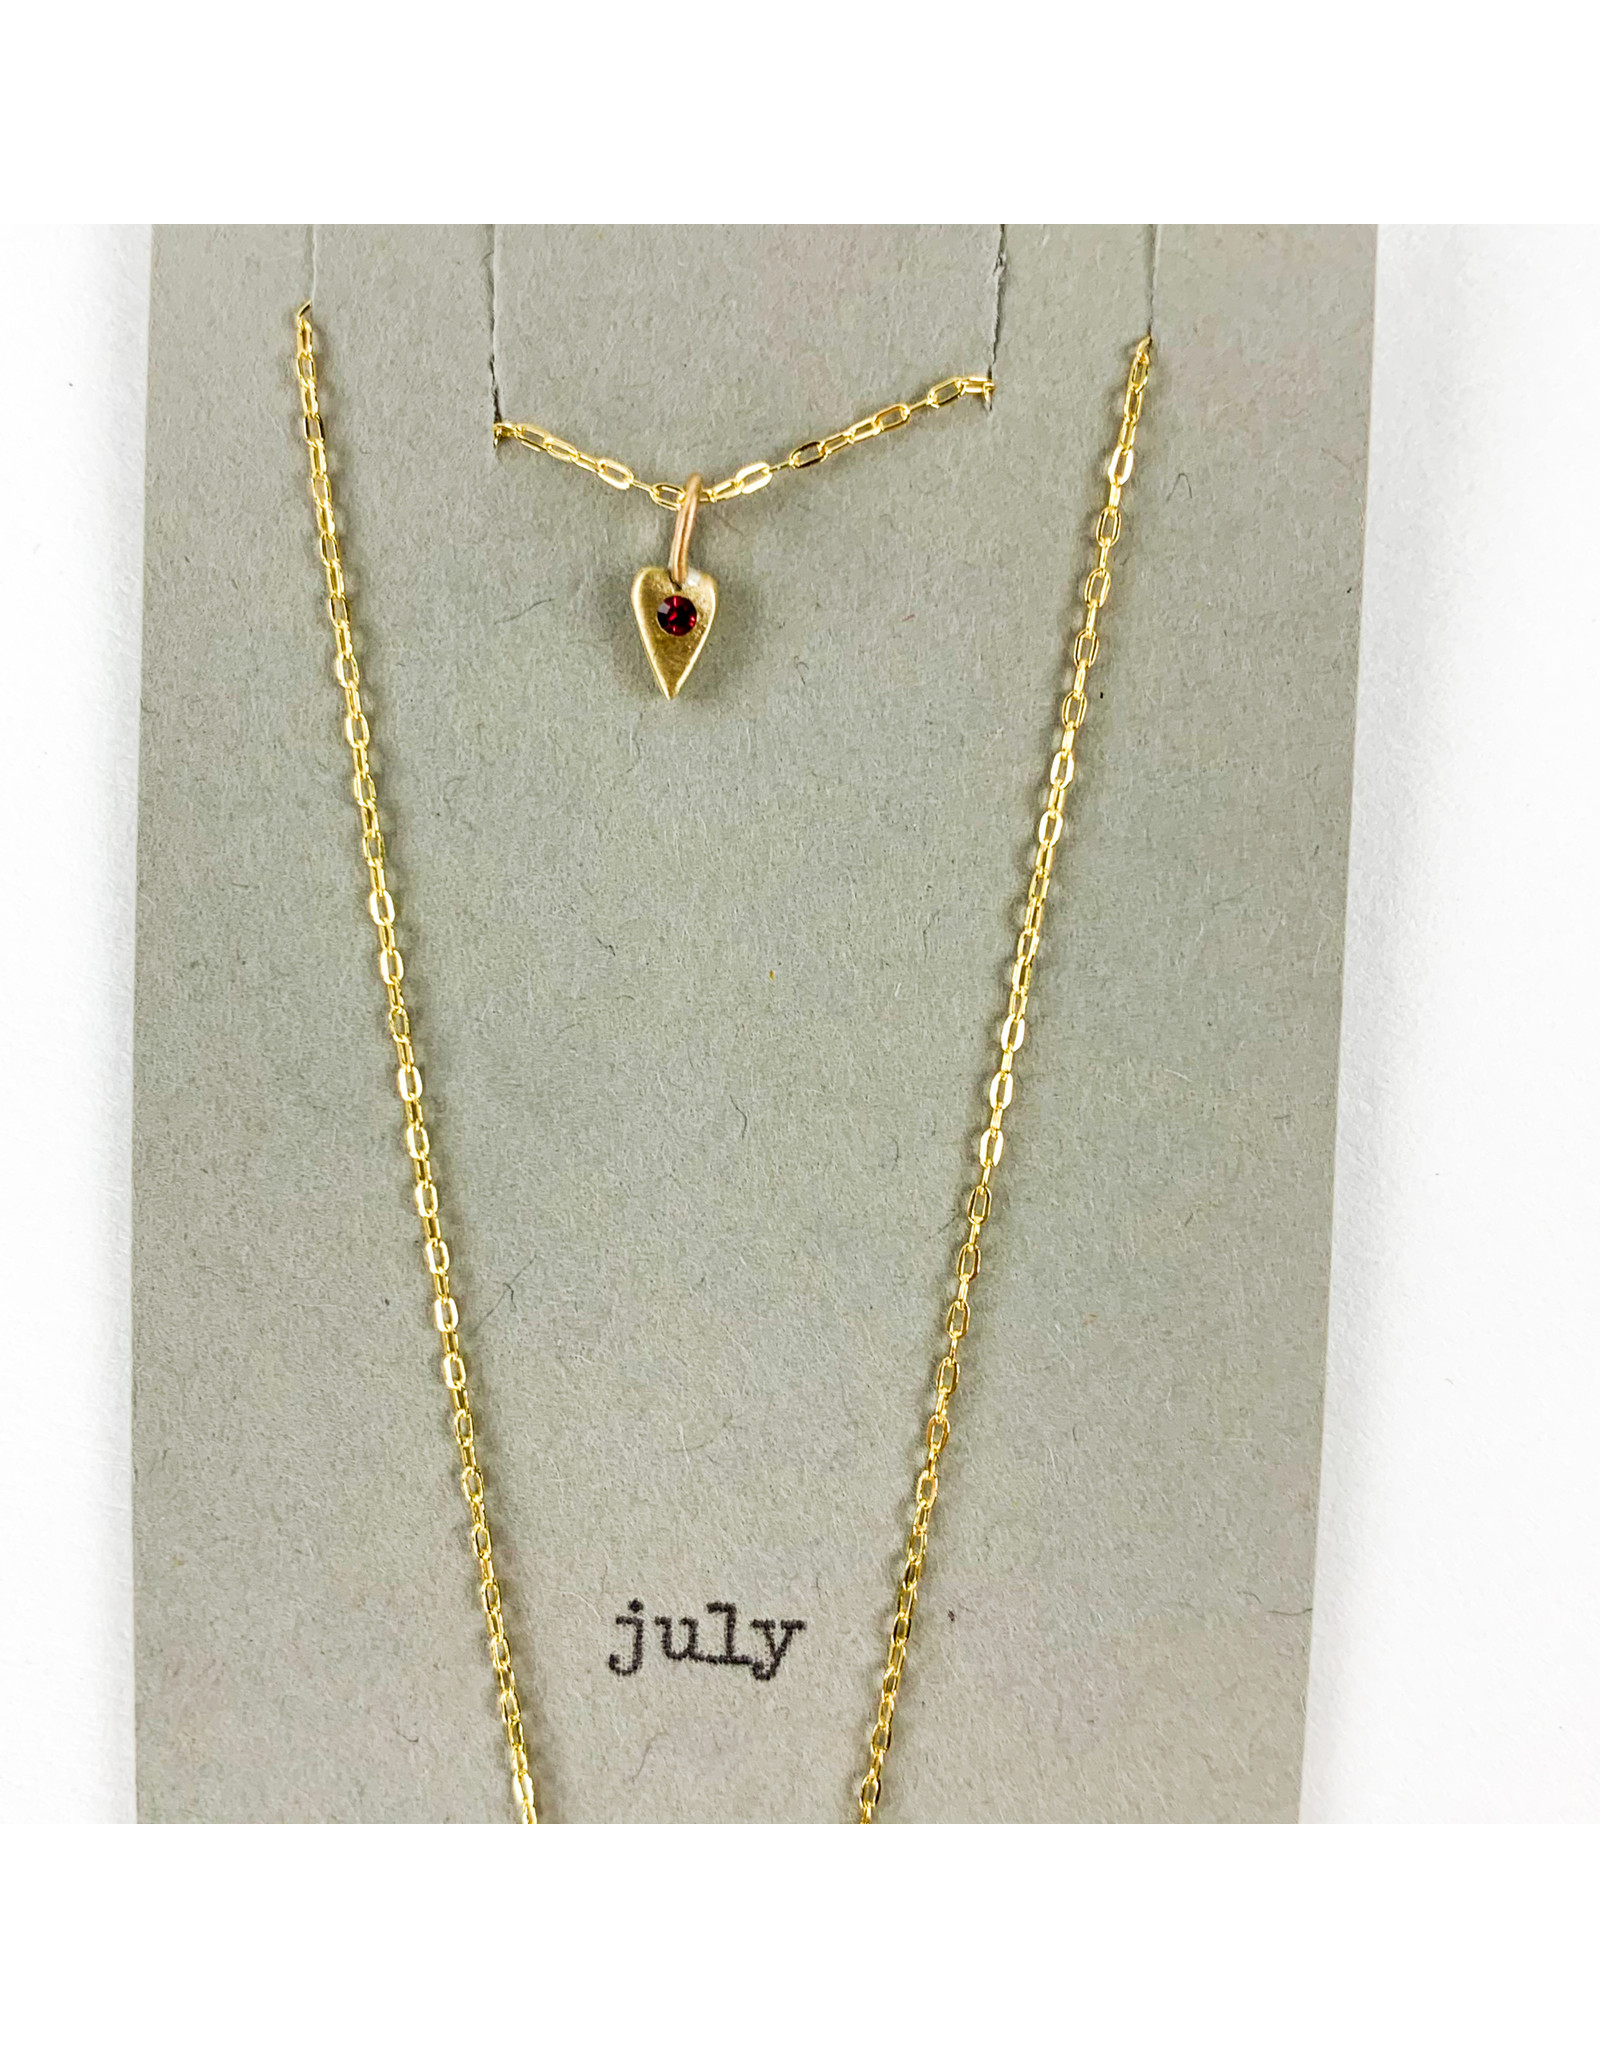 Penny Larsen July Necklace/ Ruby Gold Chain Birthstone